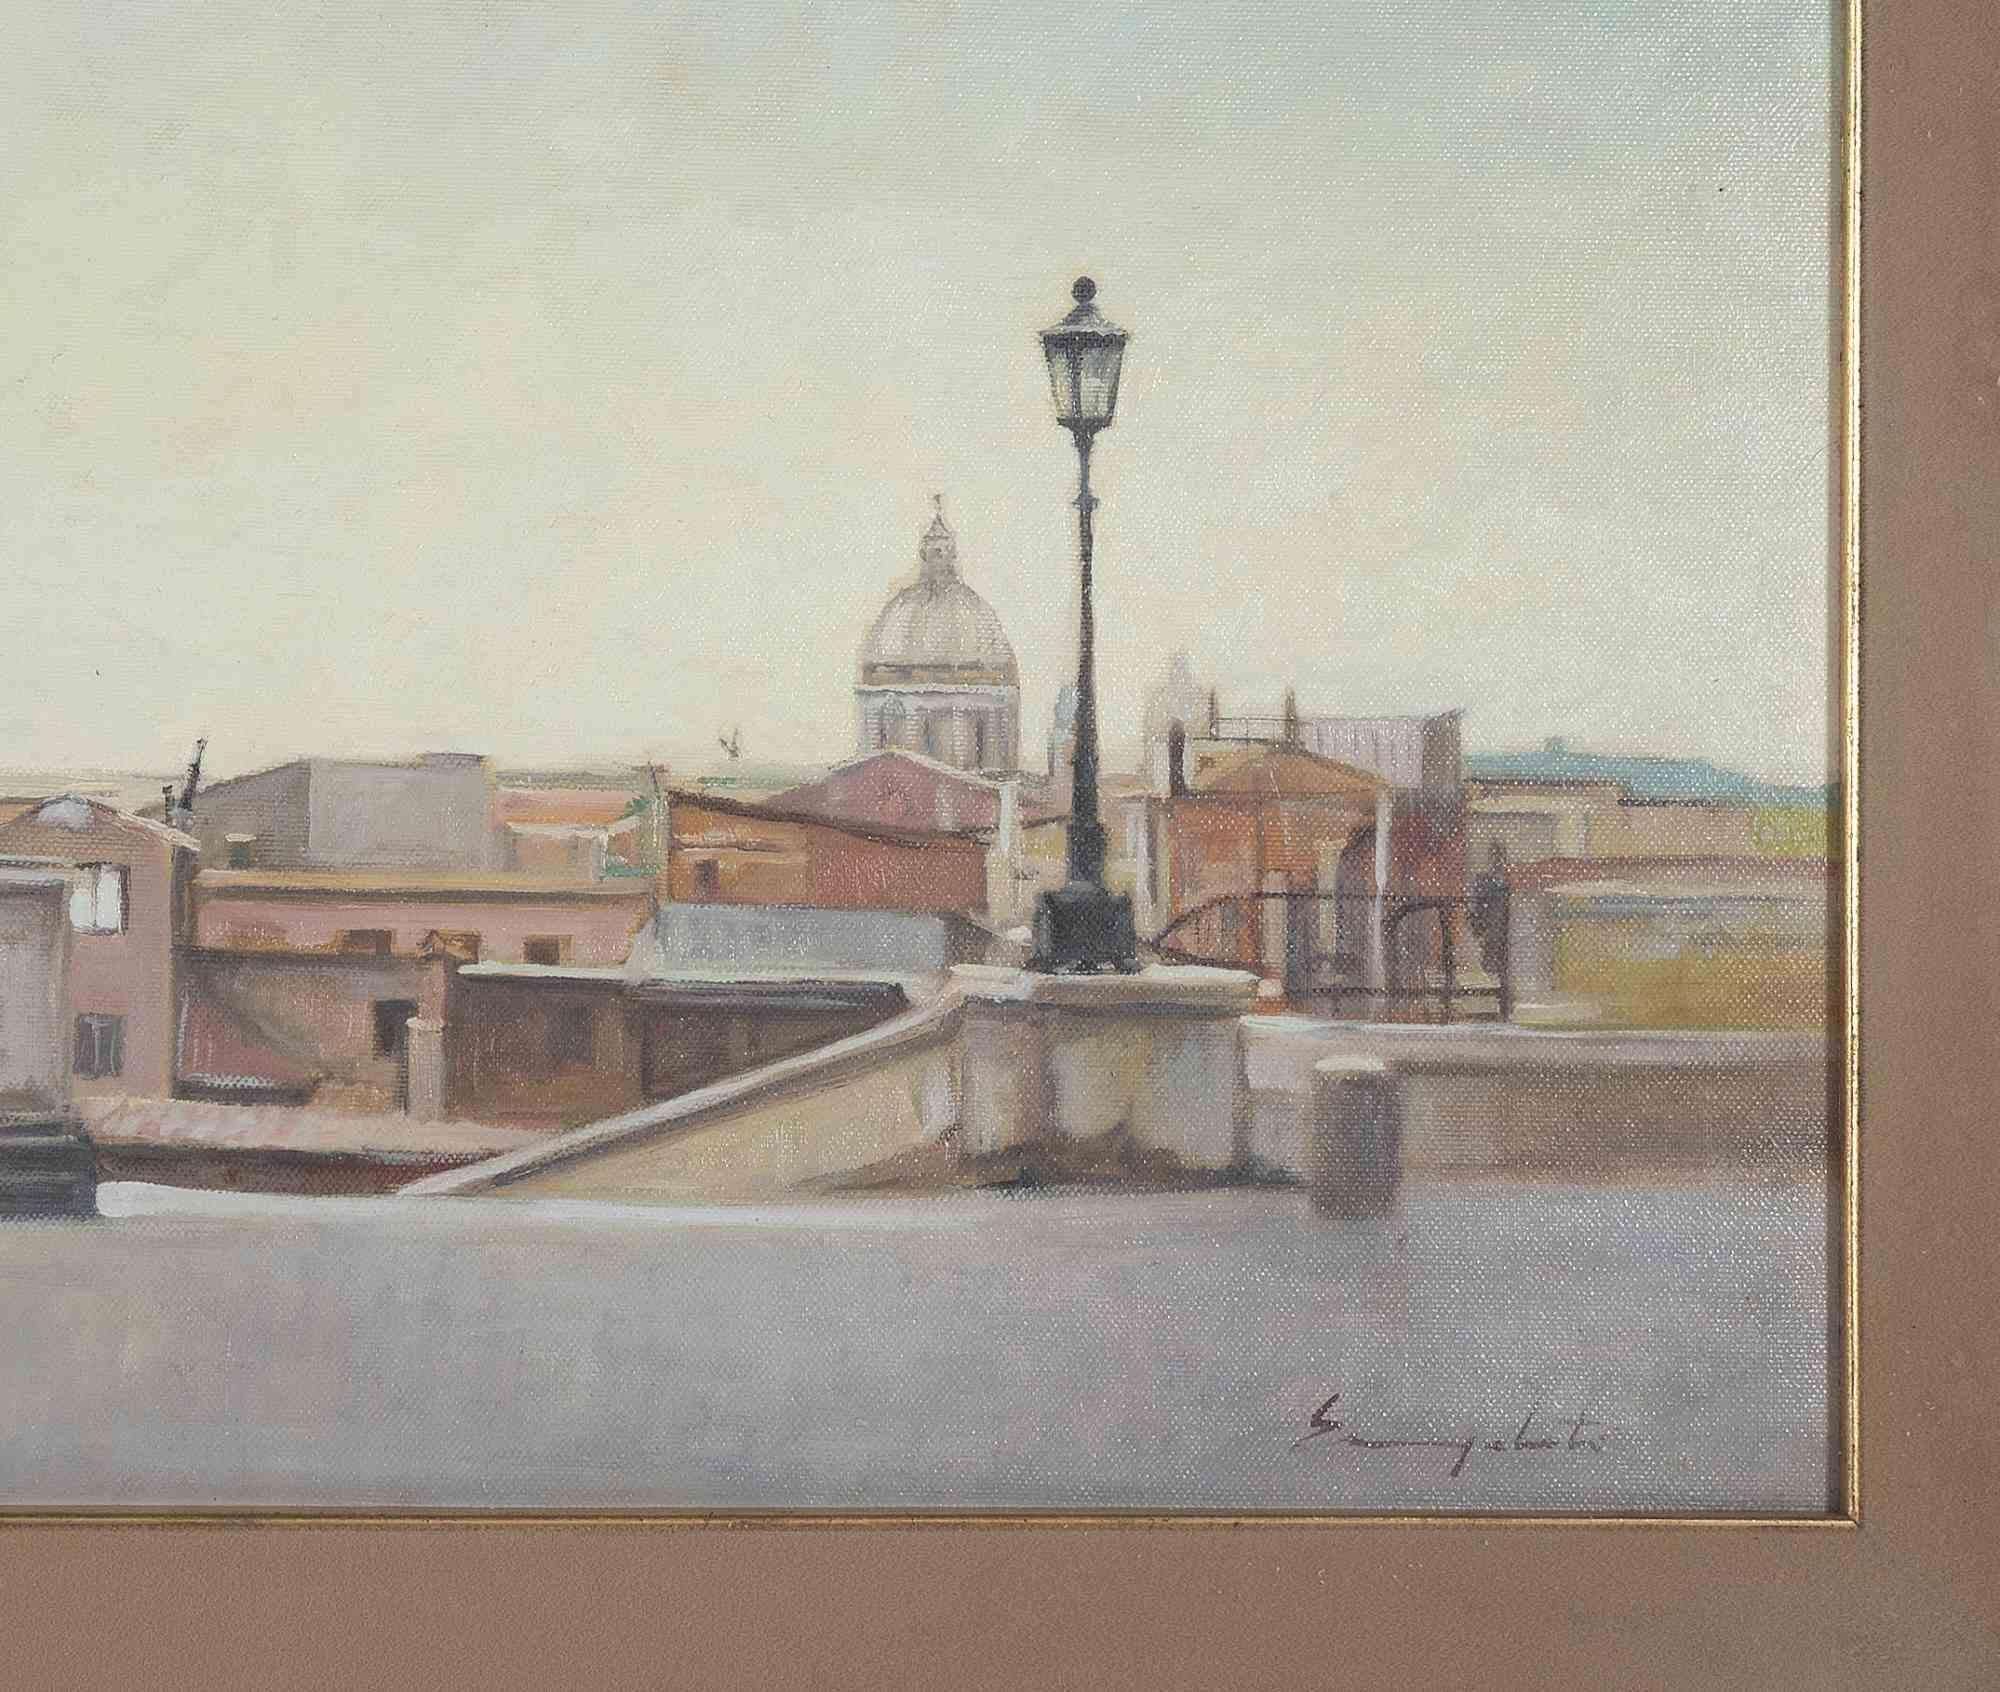 Rome from the Pincio is an orginal modern artwork realized in 1973 by the Italian artist Mario Evangelisti.

Mixed colore oil painting on canvas.

Hand signed on the lower right margin.

Signature and date on the back of artwork.

Good